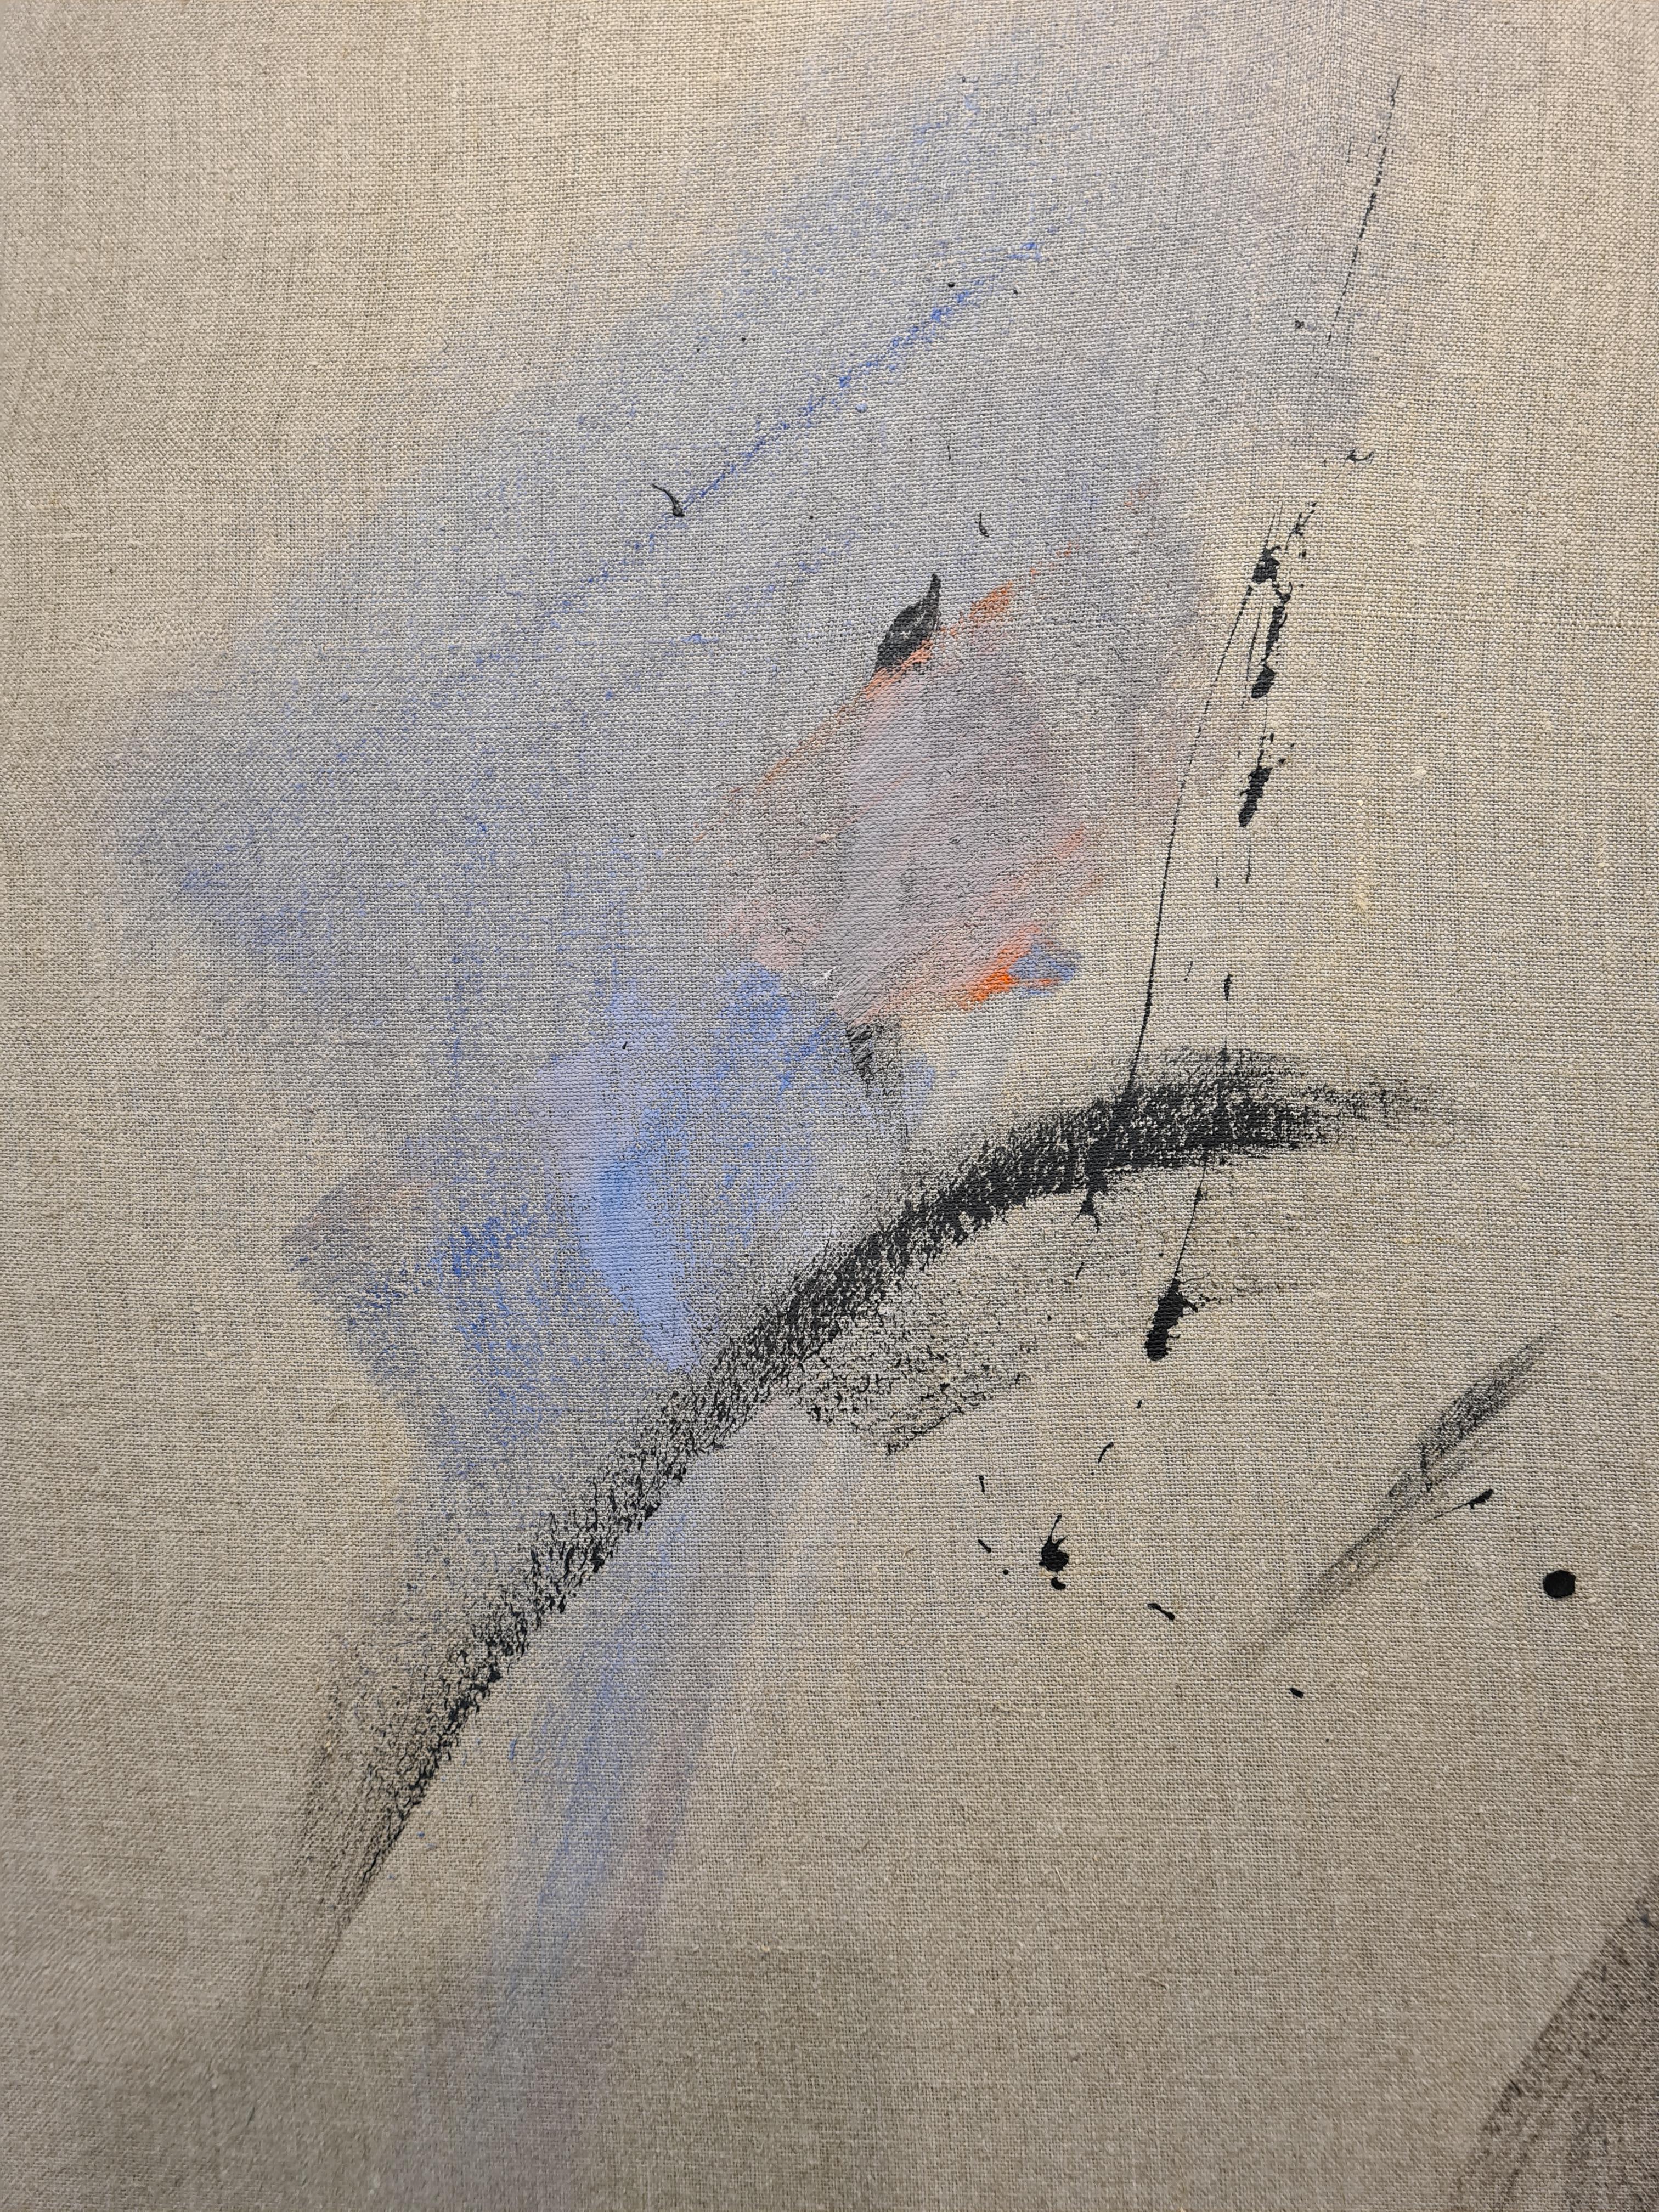 French, late mid century, unique acrylic on canvas, Lyrical Abstraction, by Jean Miotte. The painting is signed and dated 1976. This is a one-off, unique painting my Miotte not to be confused with his many later 'editions'.

Miotte came of artistic